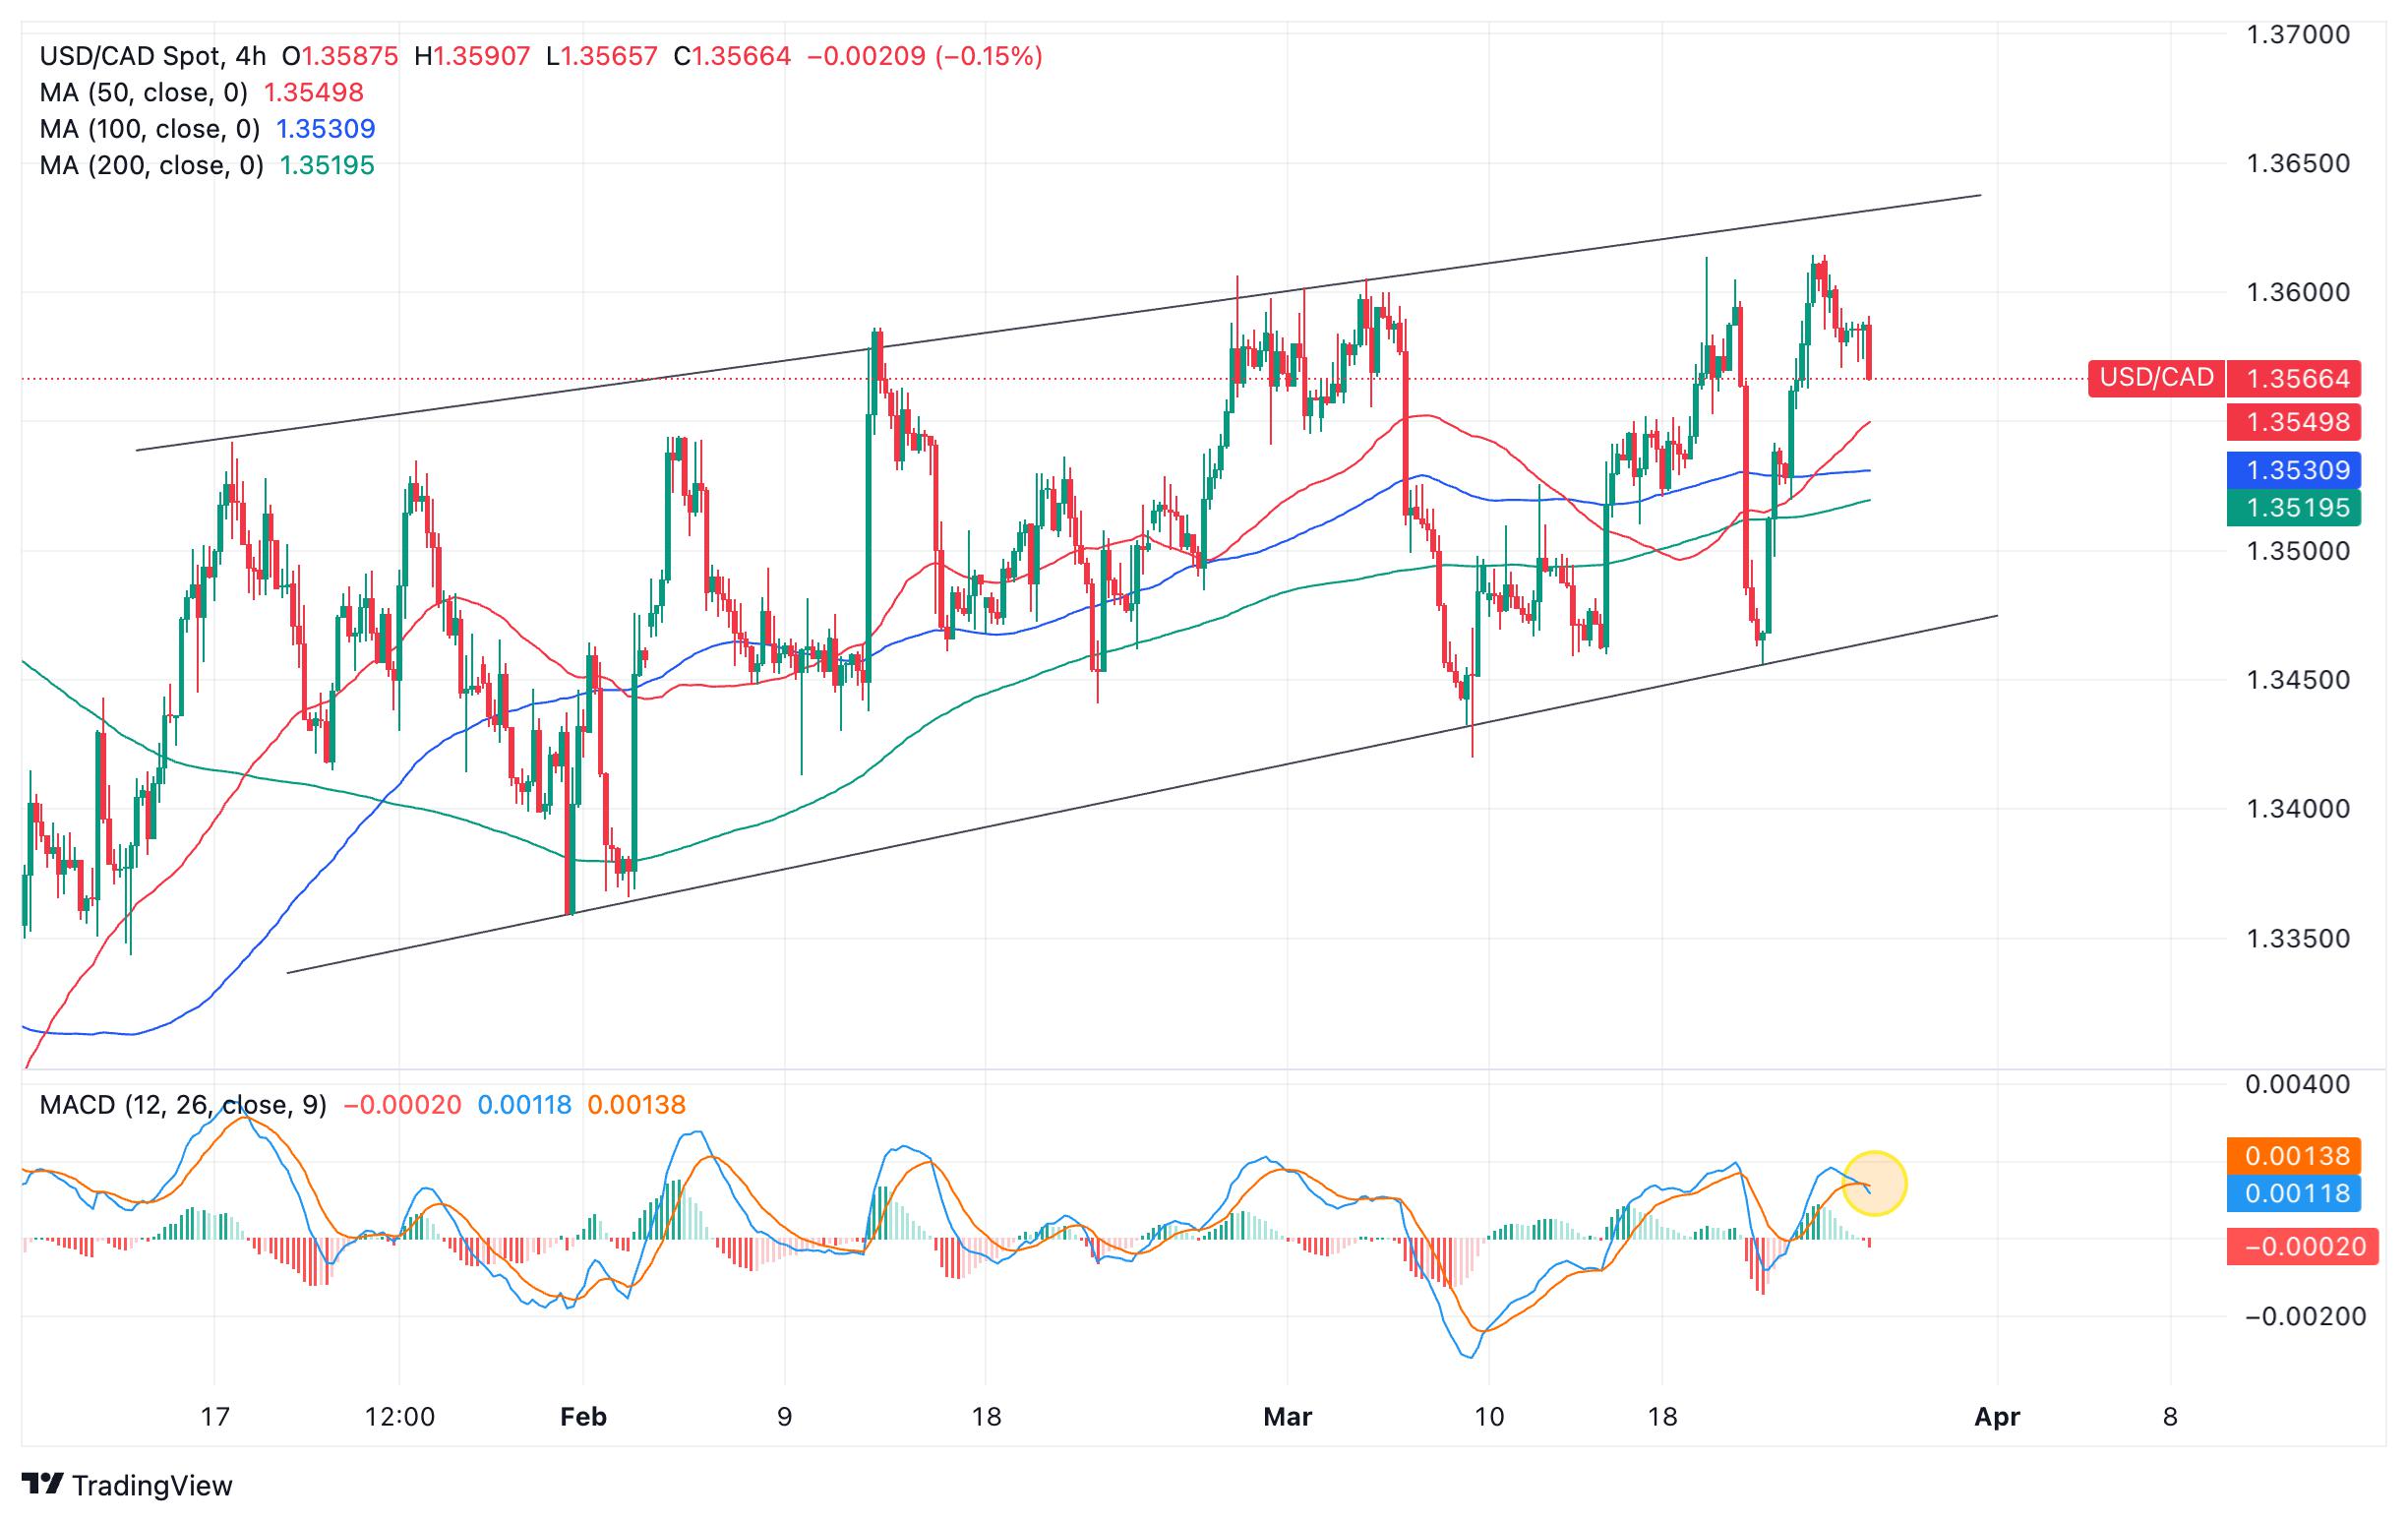 USD/CAD Price Analysis: Moving lower within channel